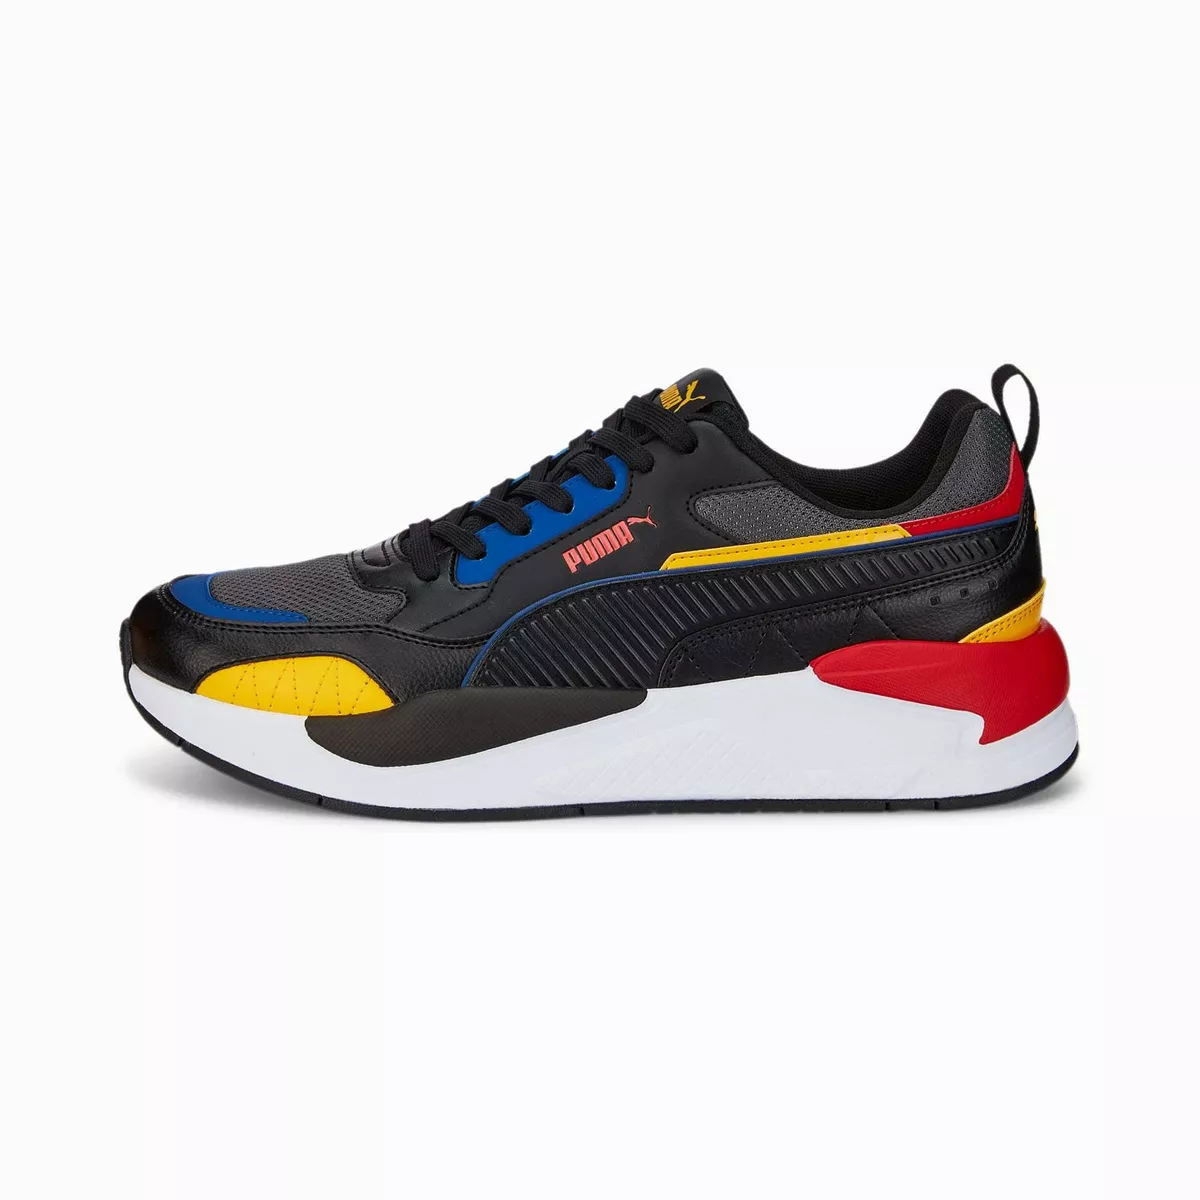 Tenis Para Hombre Puma X-ray 2 Square Color Dark Shadow/puma Black/spectra Yellow/limoges/high Risk Red - Adulto 25 Mx